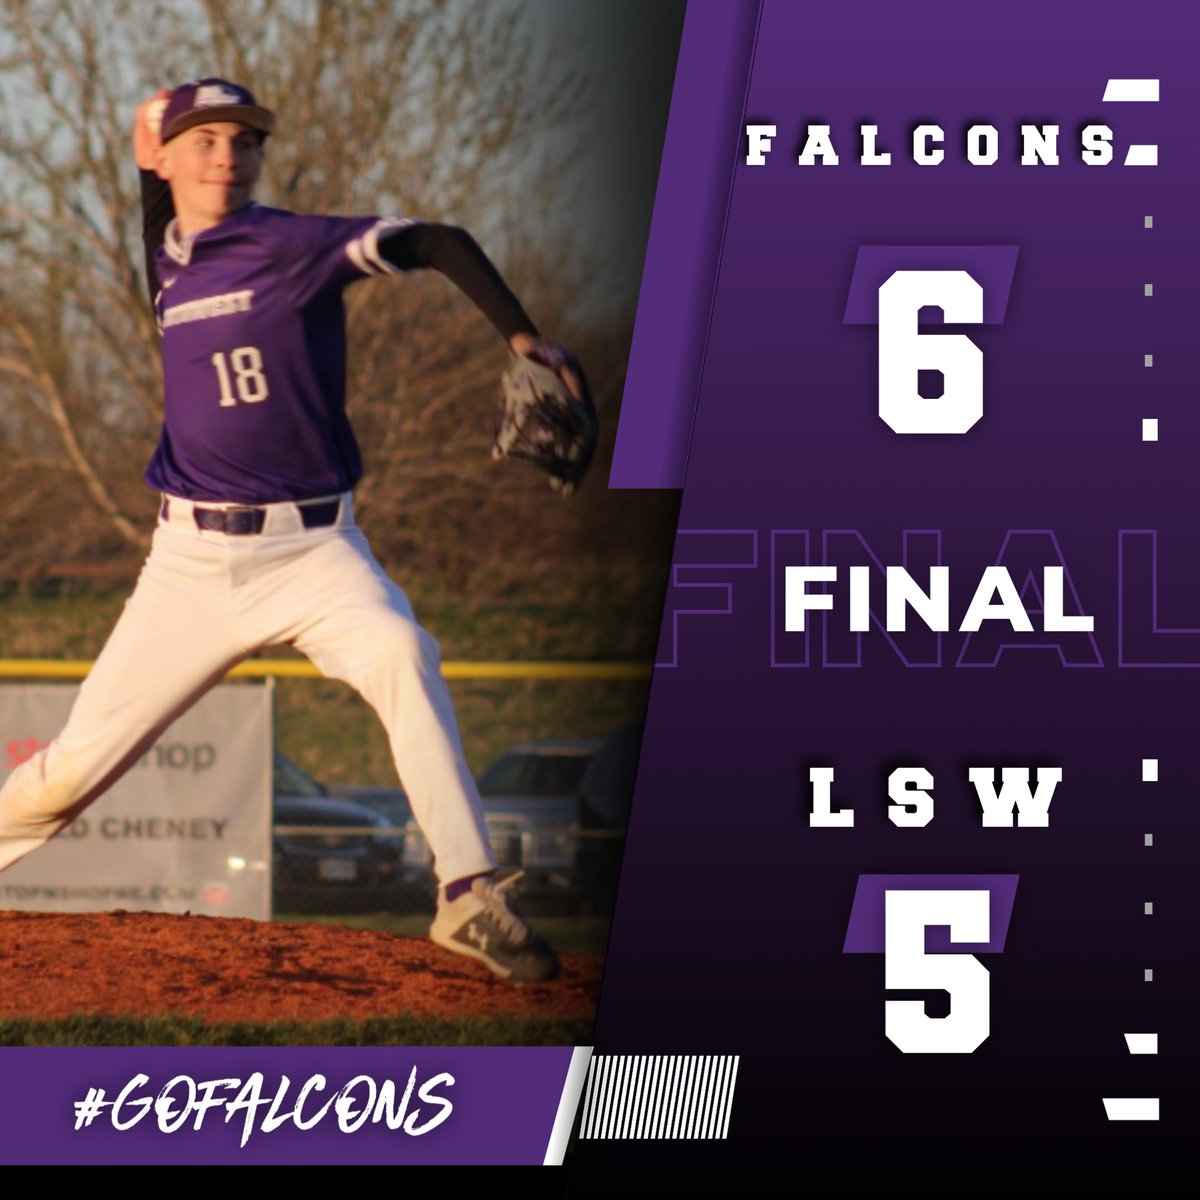 FALCON WINNER🚨

Falcons are on to the LPS City Championship‼️ 

Falcons won over LSW thanks to a stellar performance from Owen Wilkinson and closed out by Kael Shearer. Xavier Malone guns down a runner at the plate, and Wilkinson makes a stellar play to end it. #GoFalcons